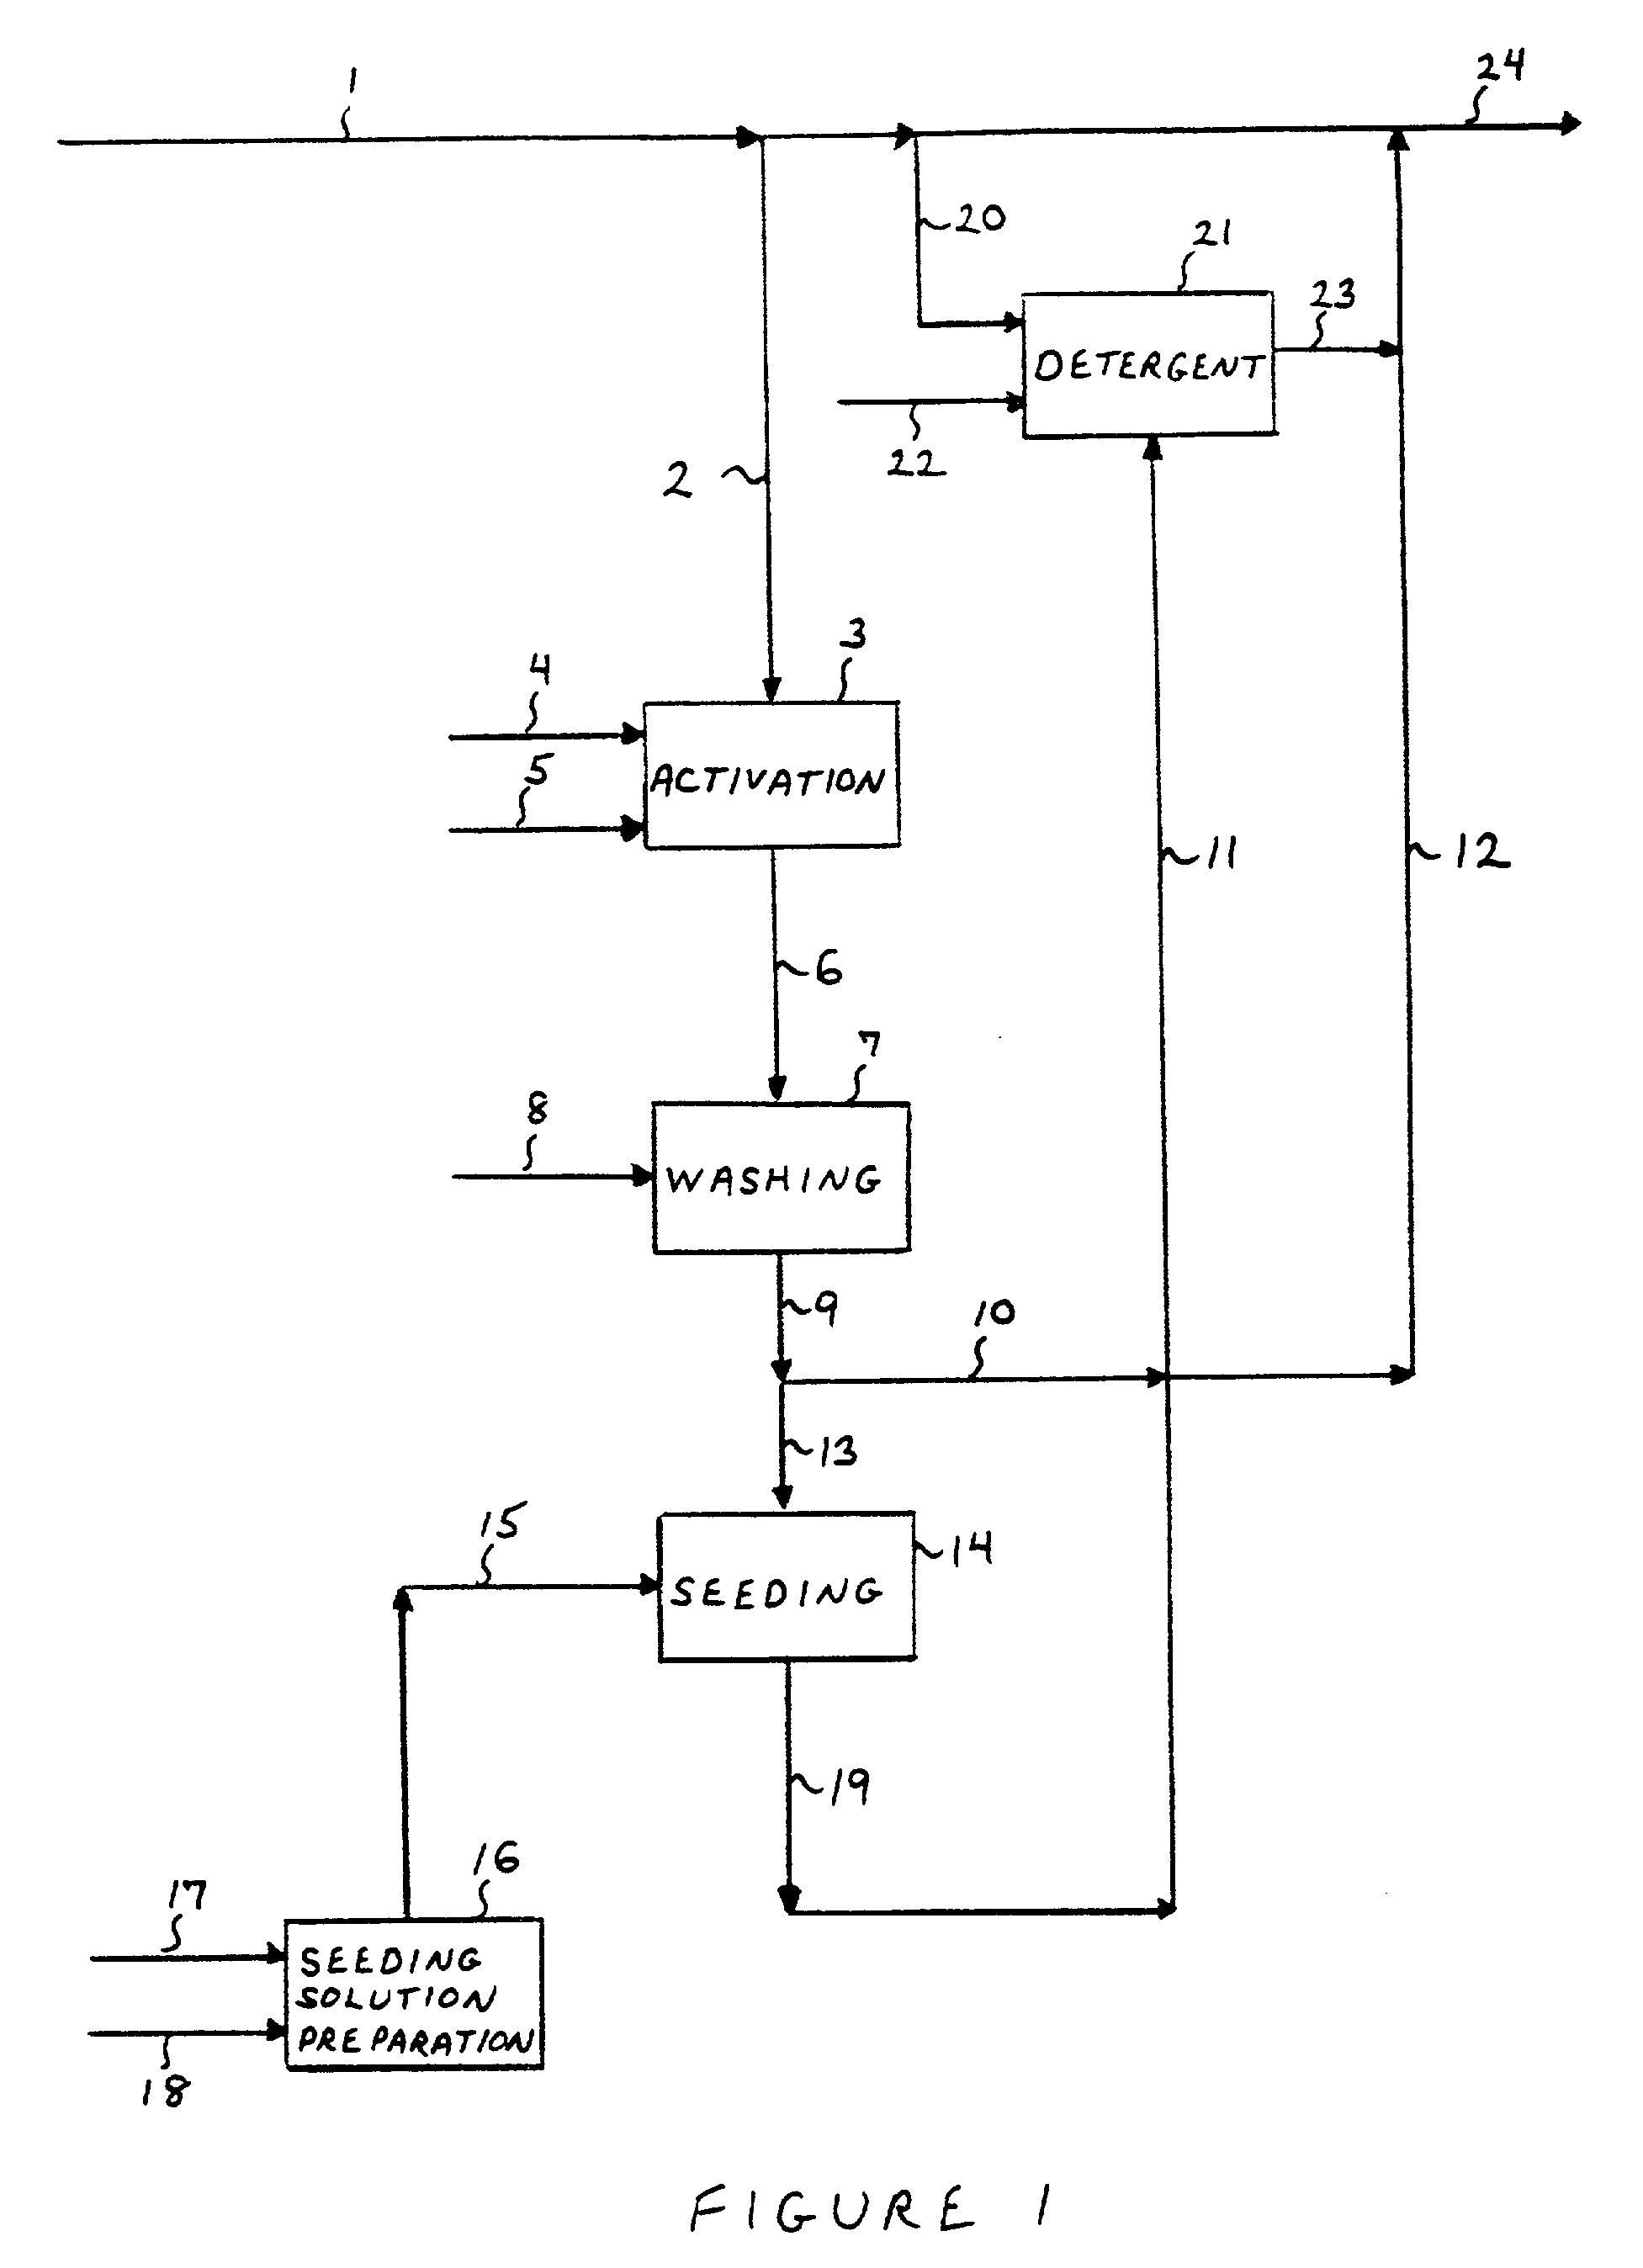 Process for the preparation of noble metal coated non-noble metal substrates, coated materials produced in accordance therewith and compositions utilizing the coated materials